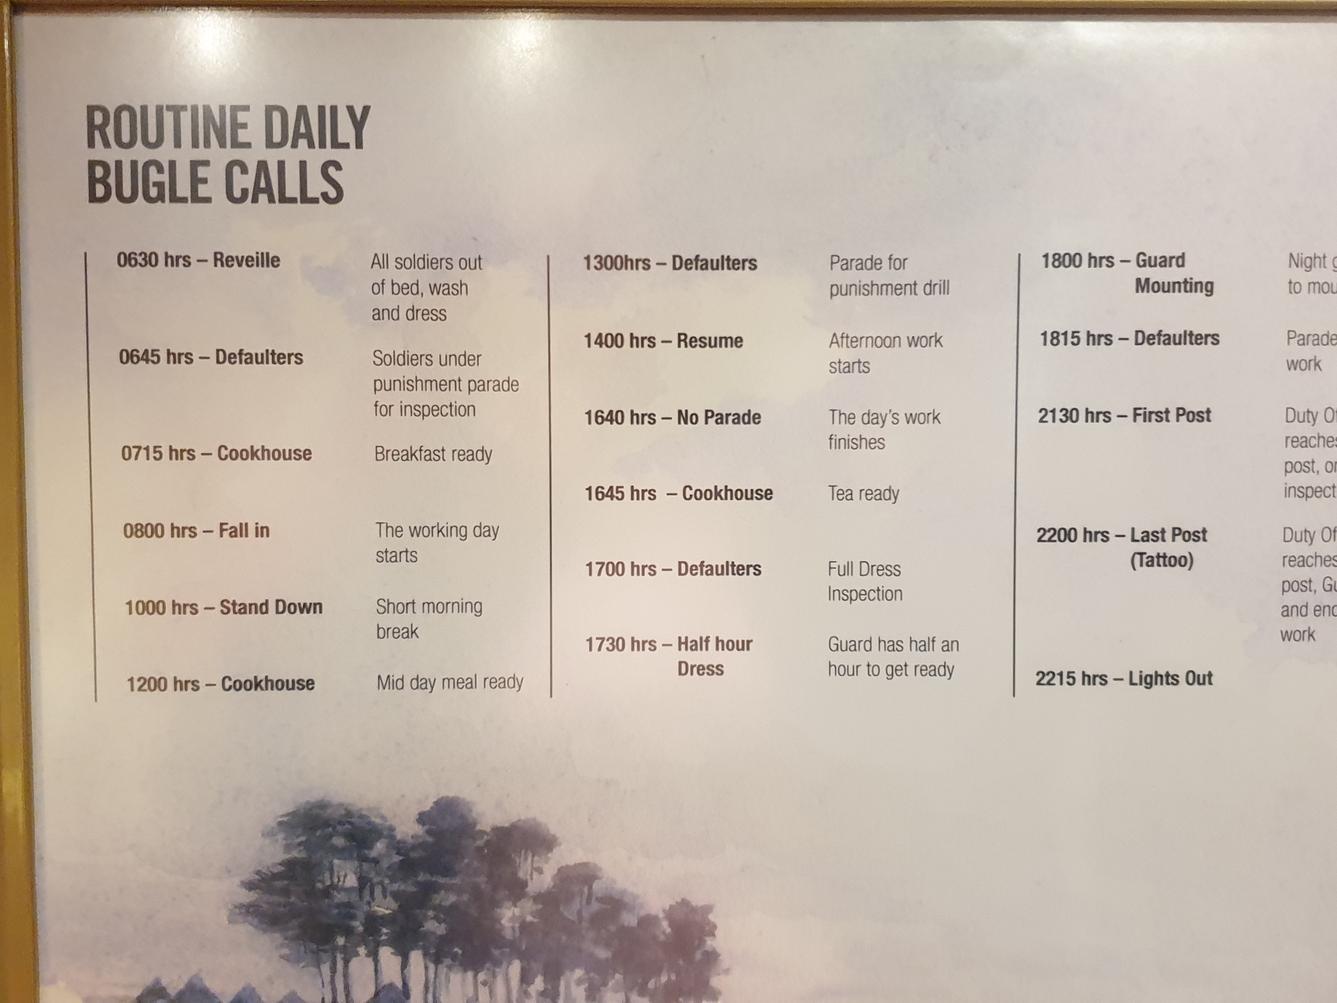 A list of routine daily bugle calls helps to illustrate daily life.